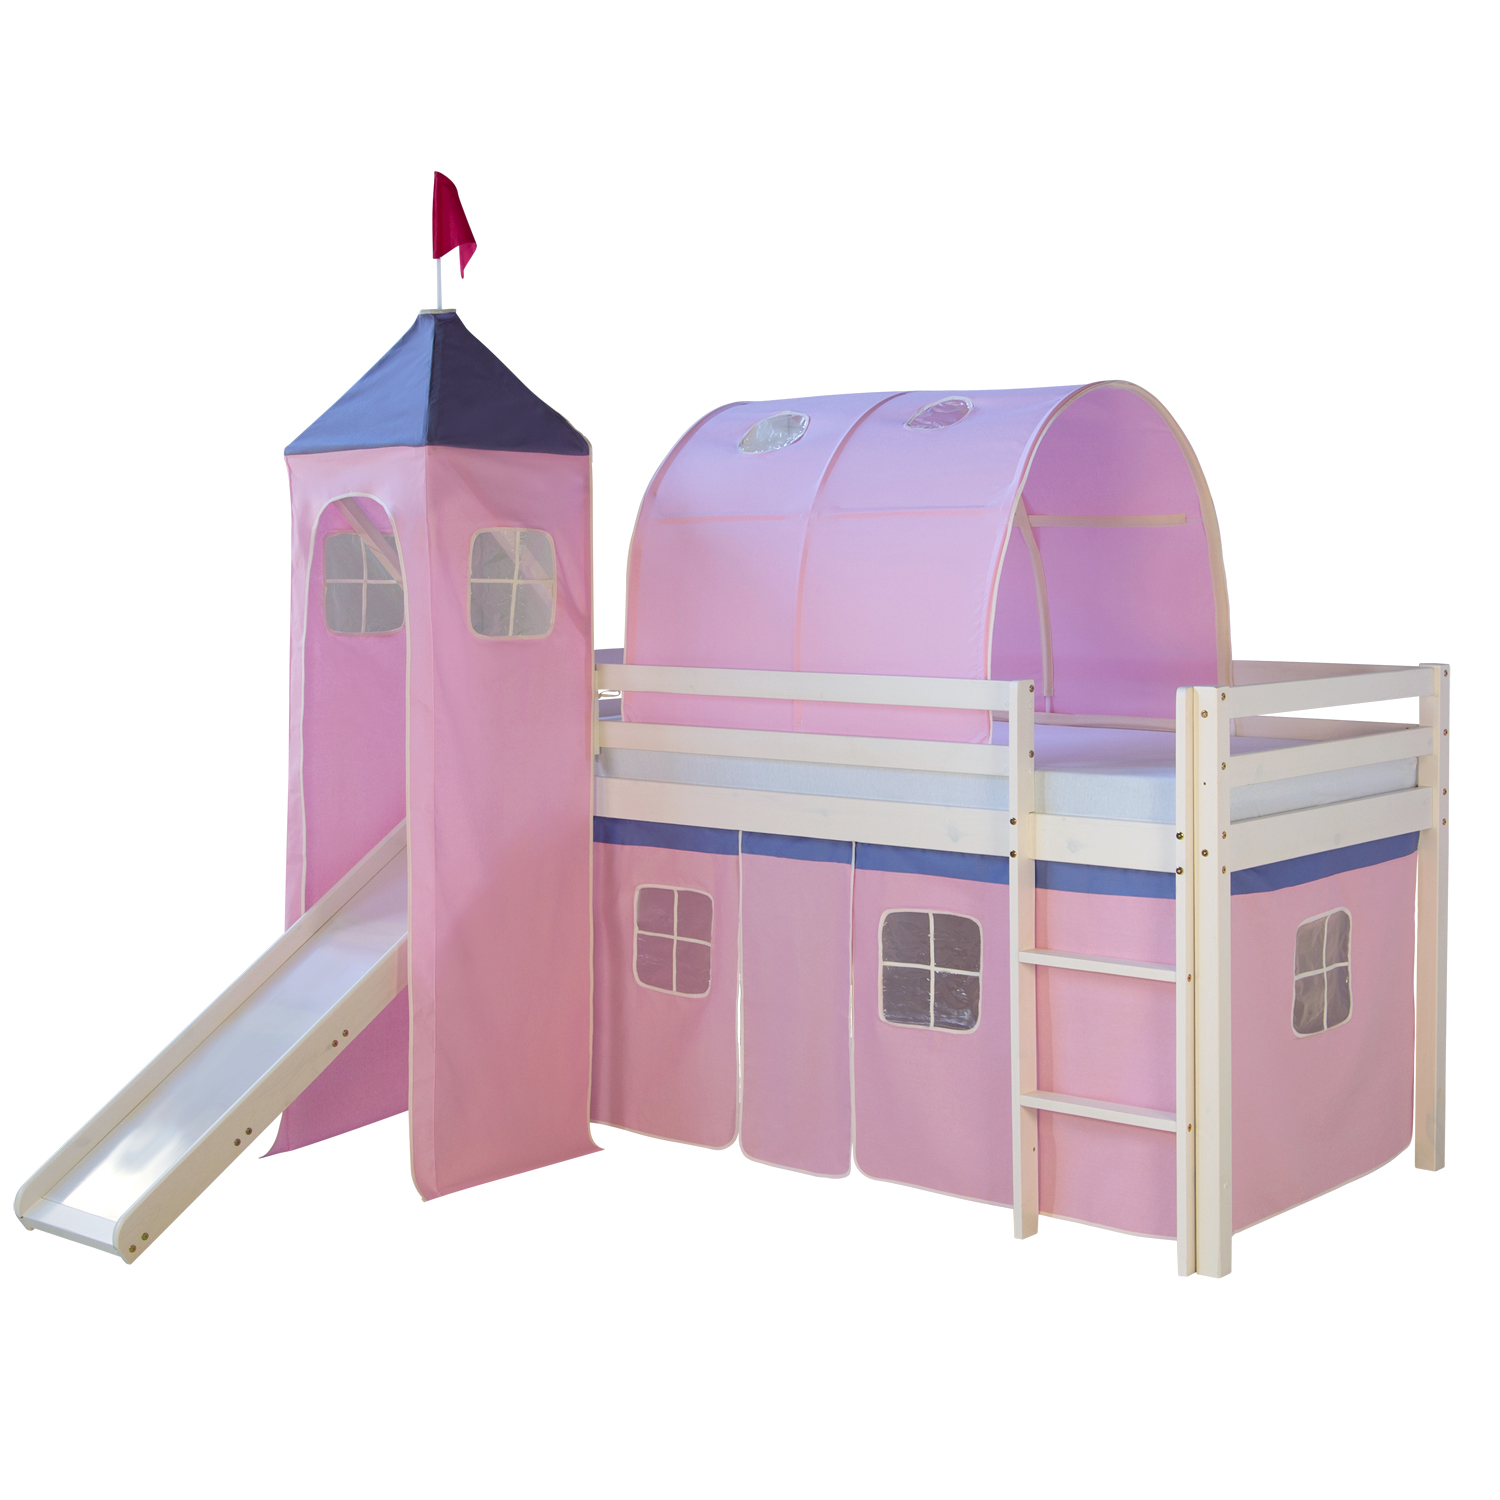 Loftbed 90x200 cm with Tower Tunnel Slide Mattress Bunk bed Childrens bed Solid Pine Wood Slats Curtain Pink